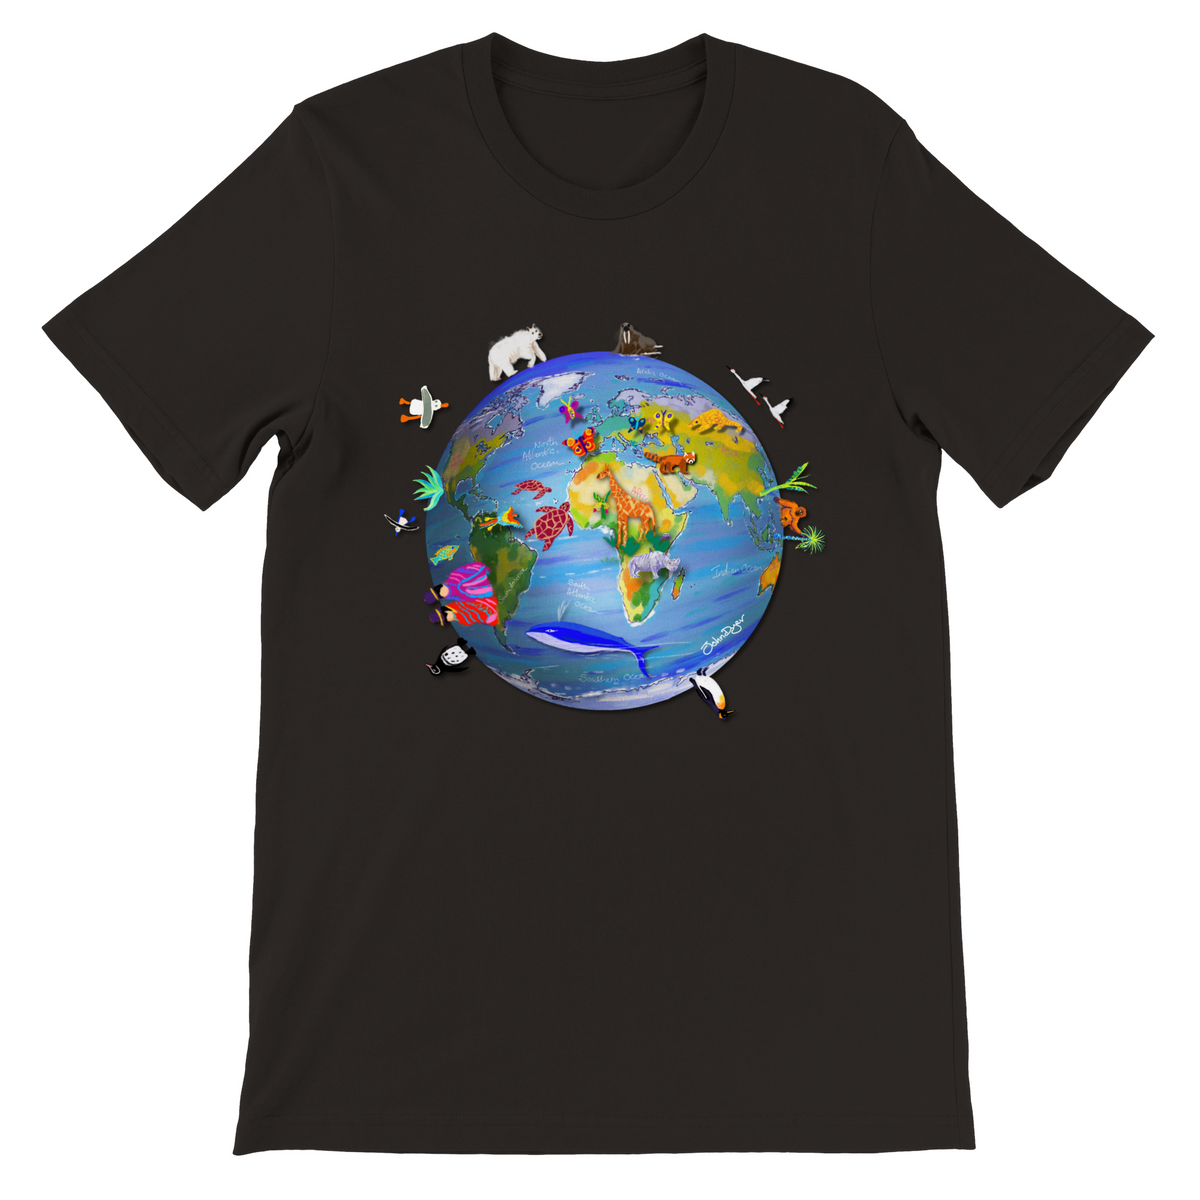 Black Earth T-Shirt featuring art from John Dyer of planet earth, climate change and wildlife. This fantastic art earth t-shirt features a drawing of planet earth with endangered animals and environments. Unisex and eco-friendly. Free worldwide delivery.